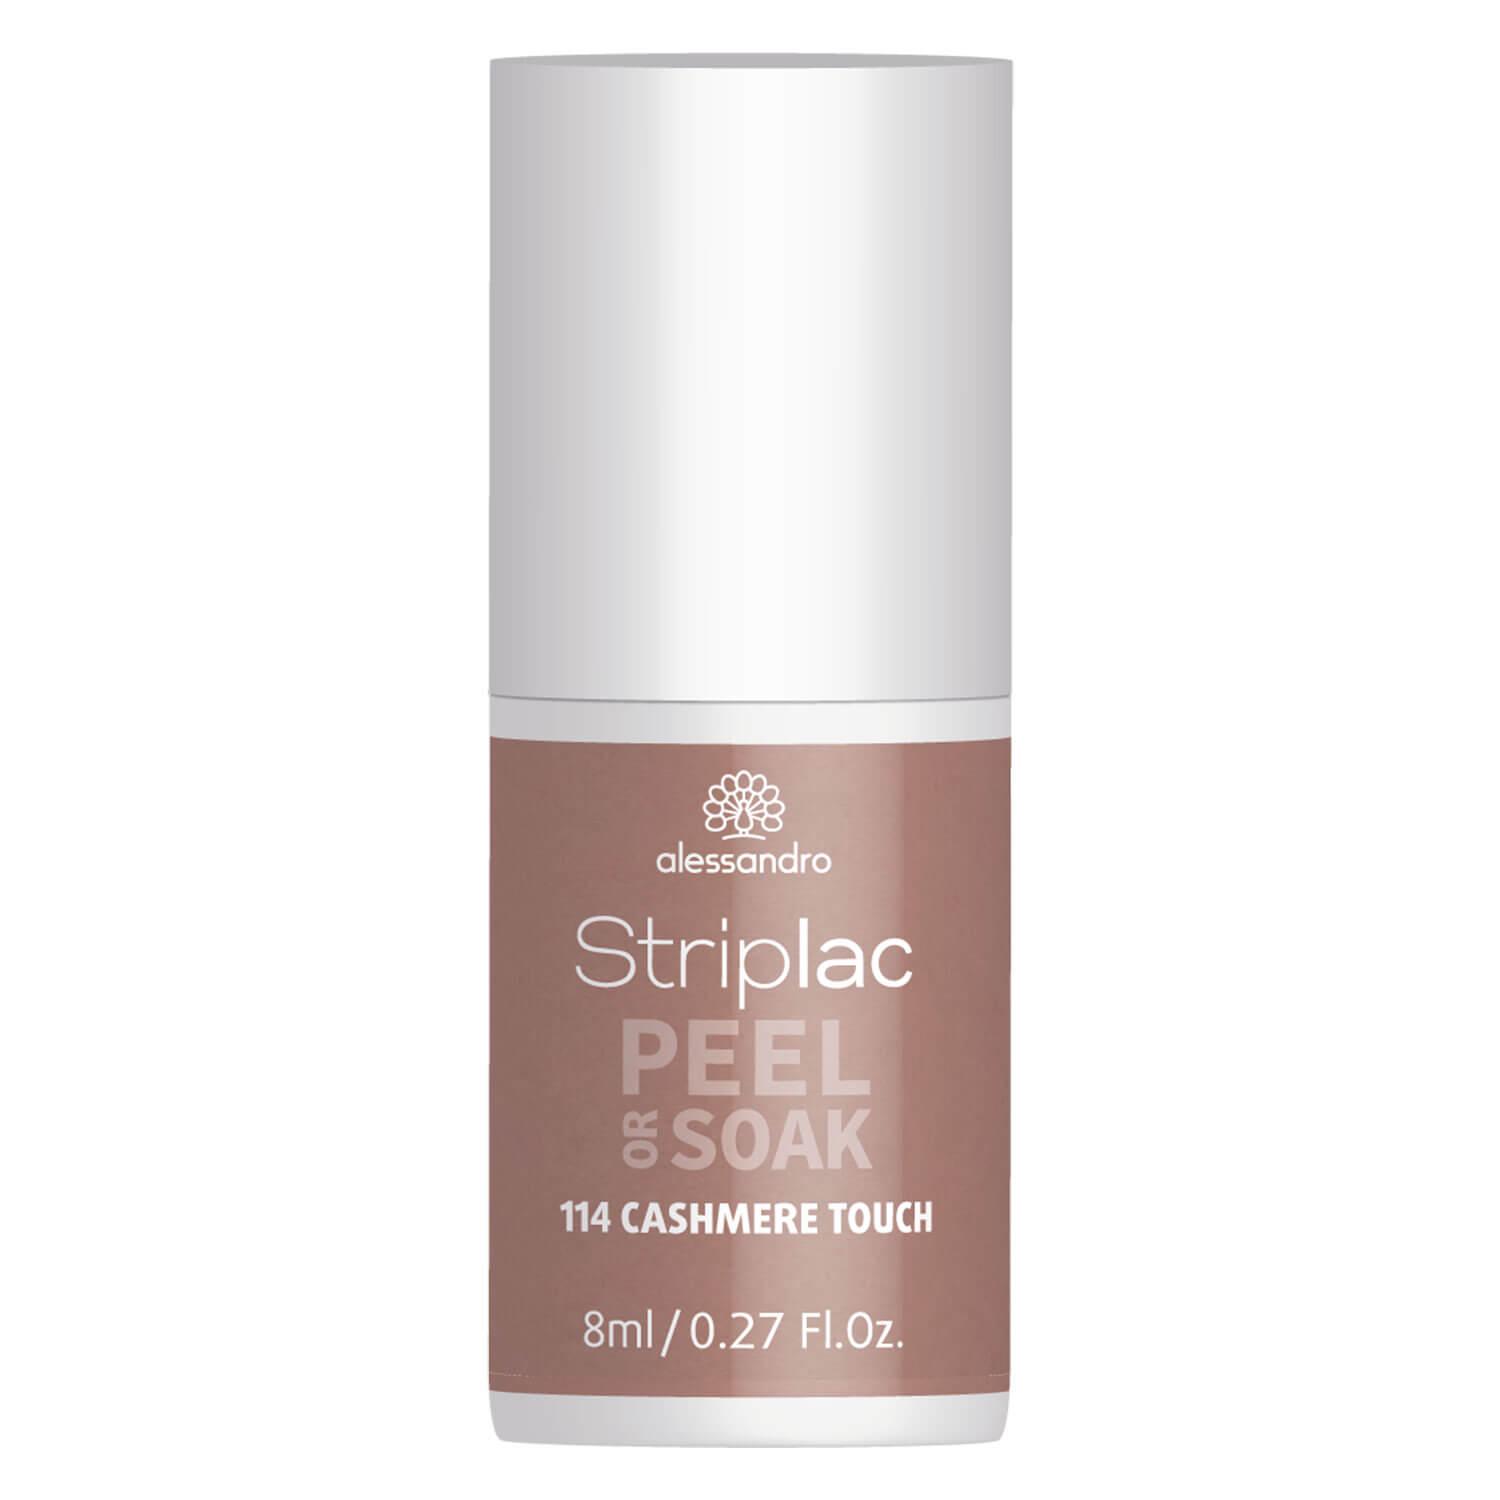 Striplac Peel or Soak - Cashmere Touch